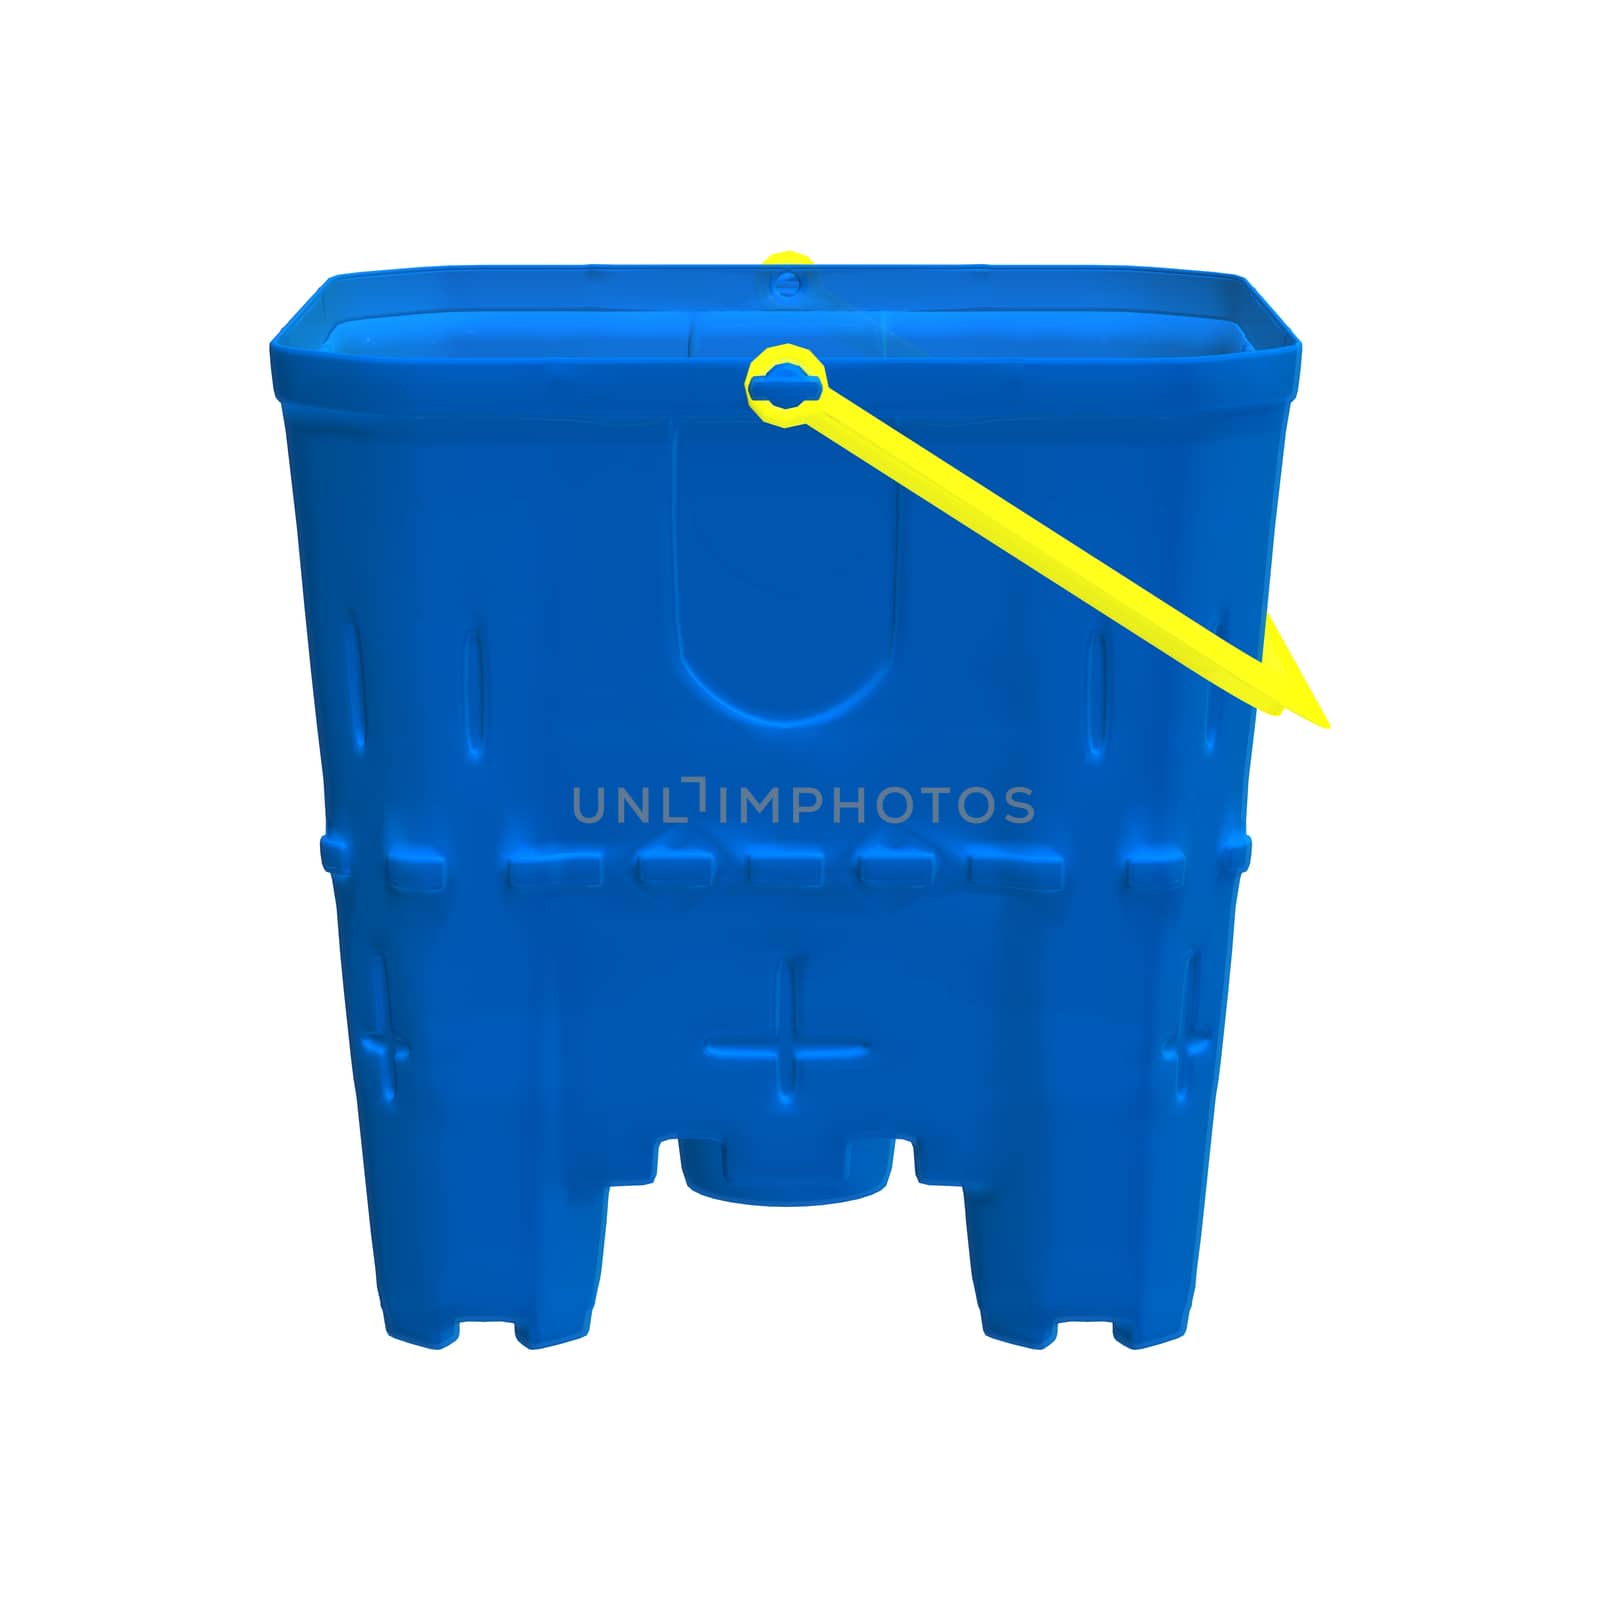 3D digital render of a blue plastic bucket isolated on white background